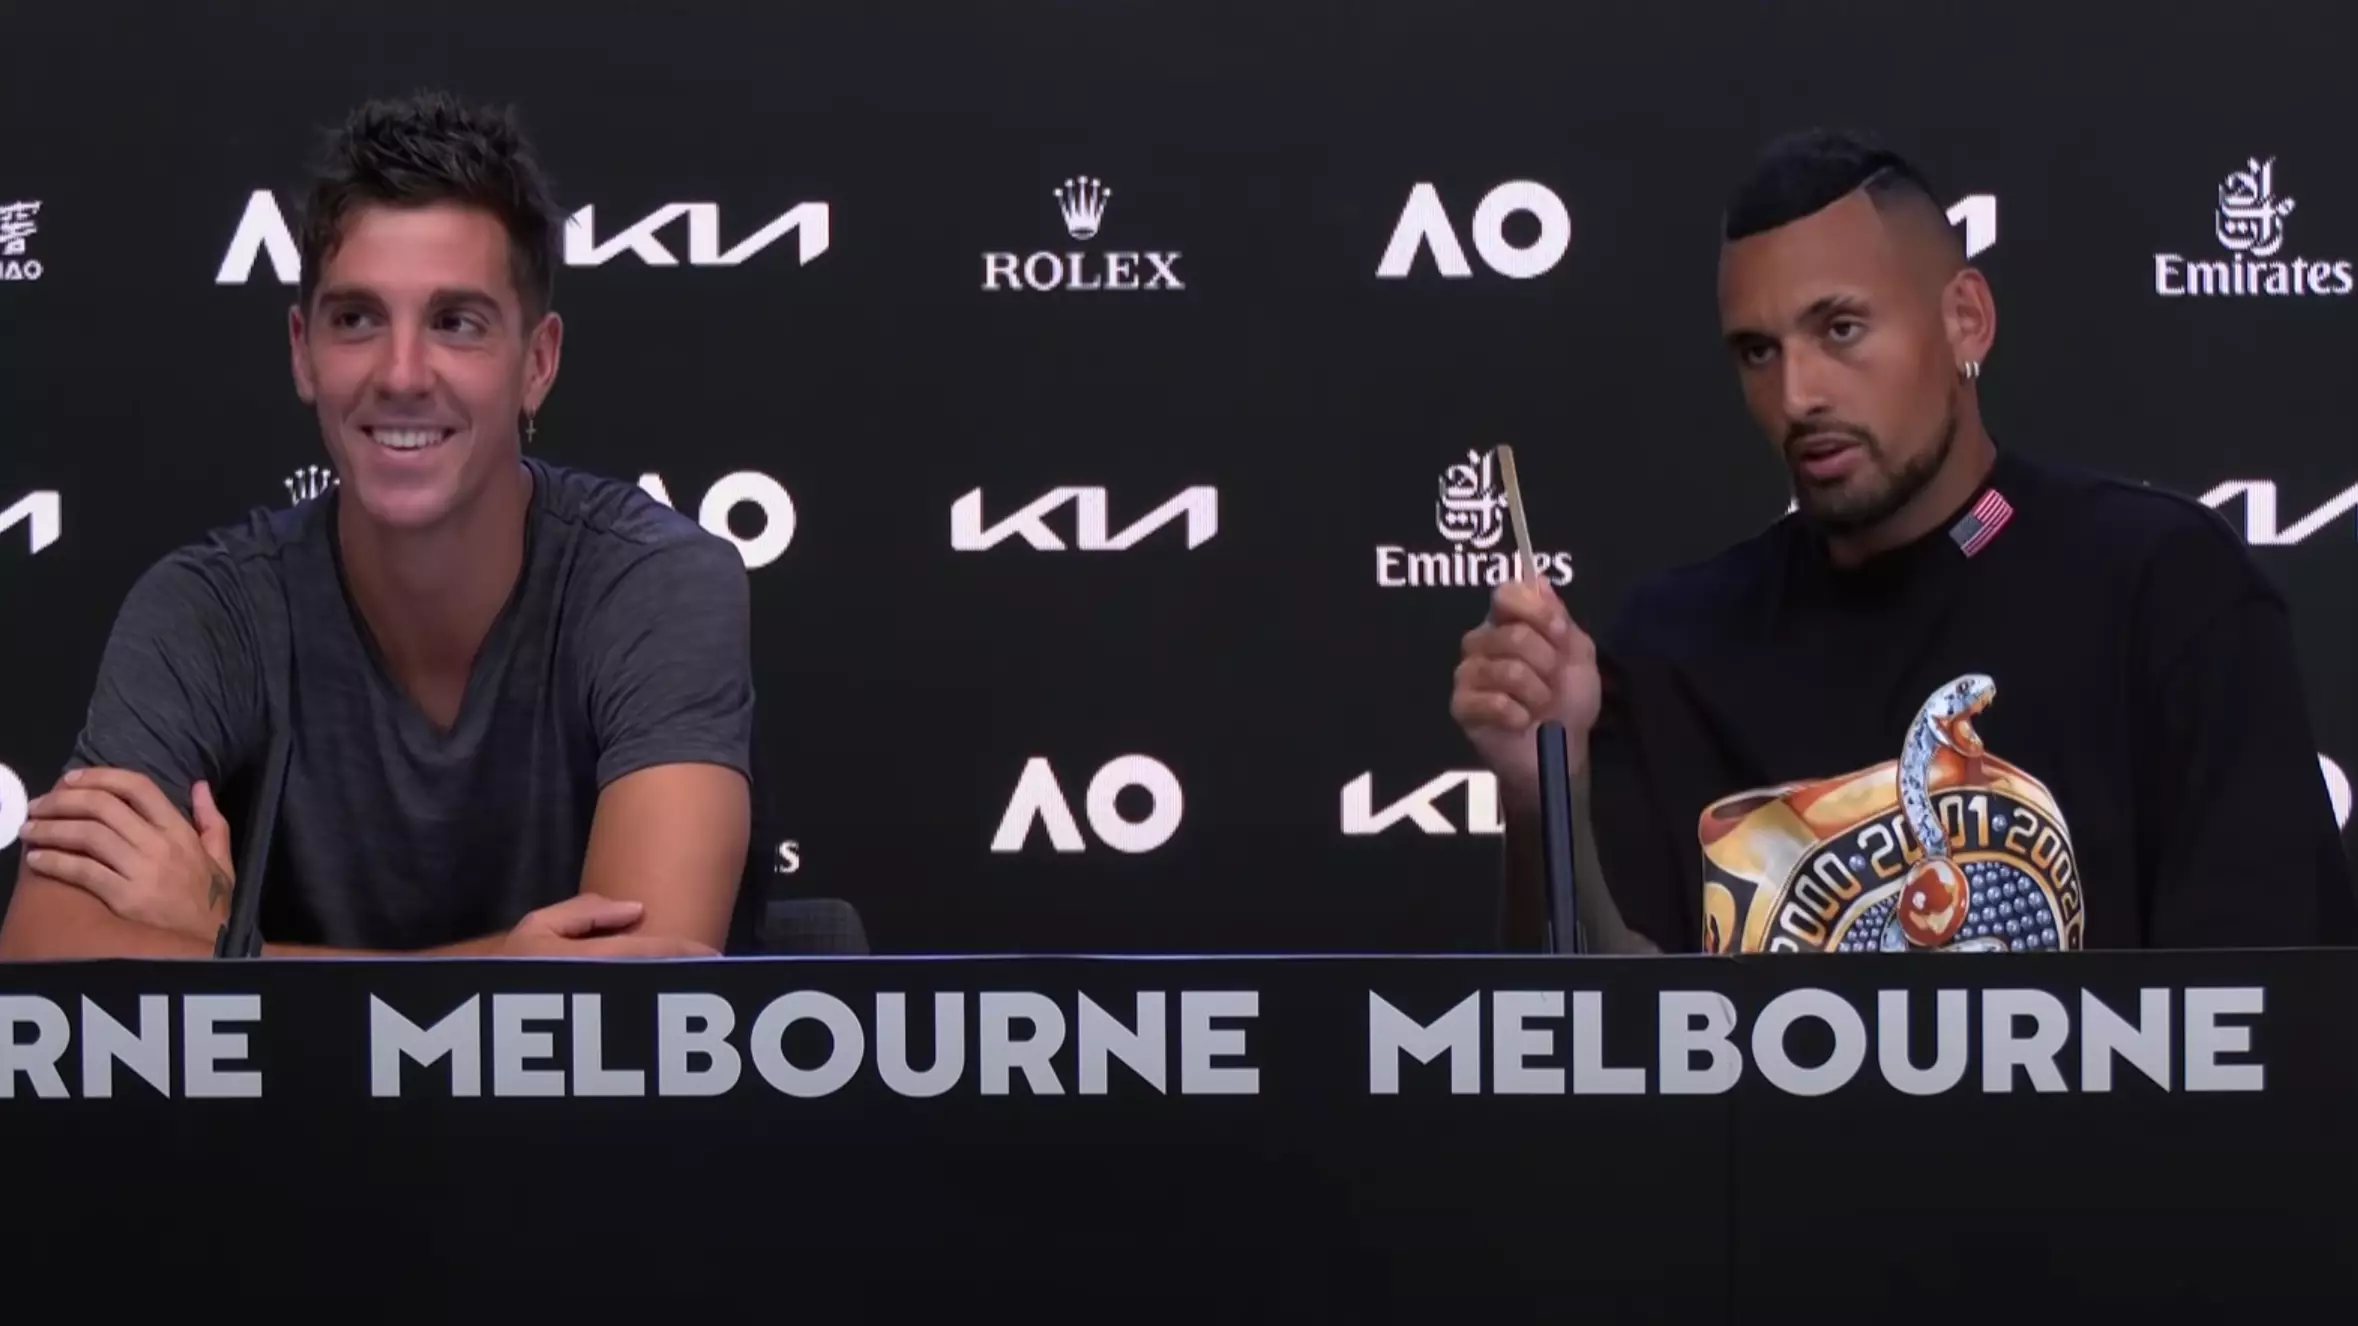 Nick Kyrgios Brilliantly Shut Down 'Depressing' Questions From Reporters, He's Absolutely Spot On